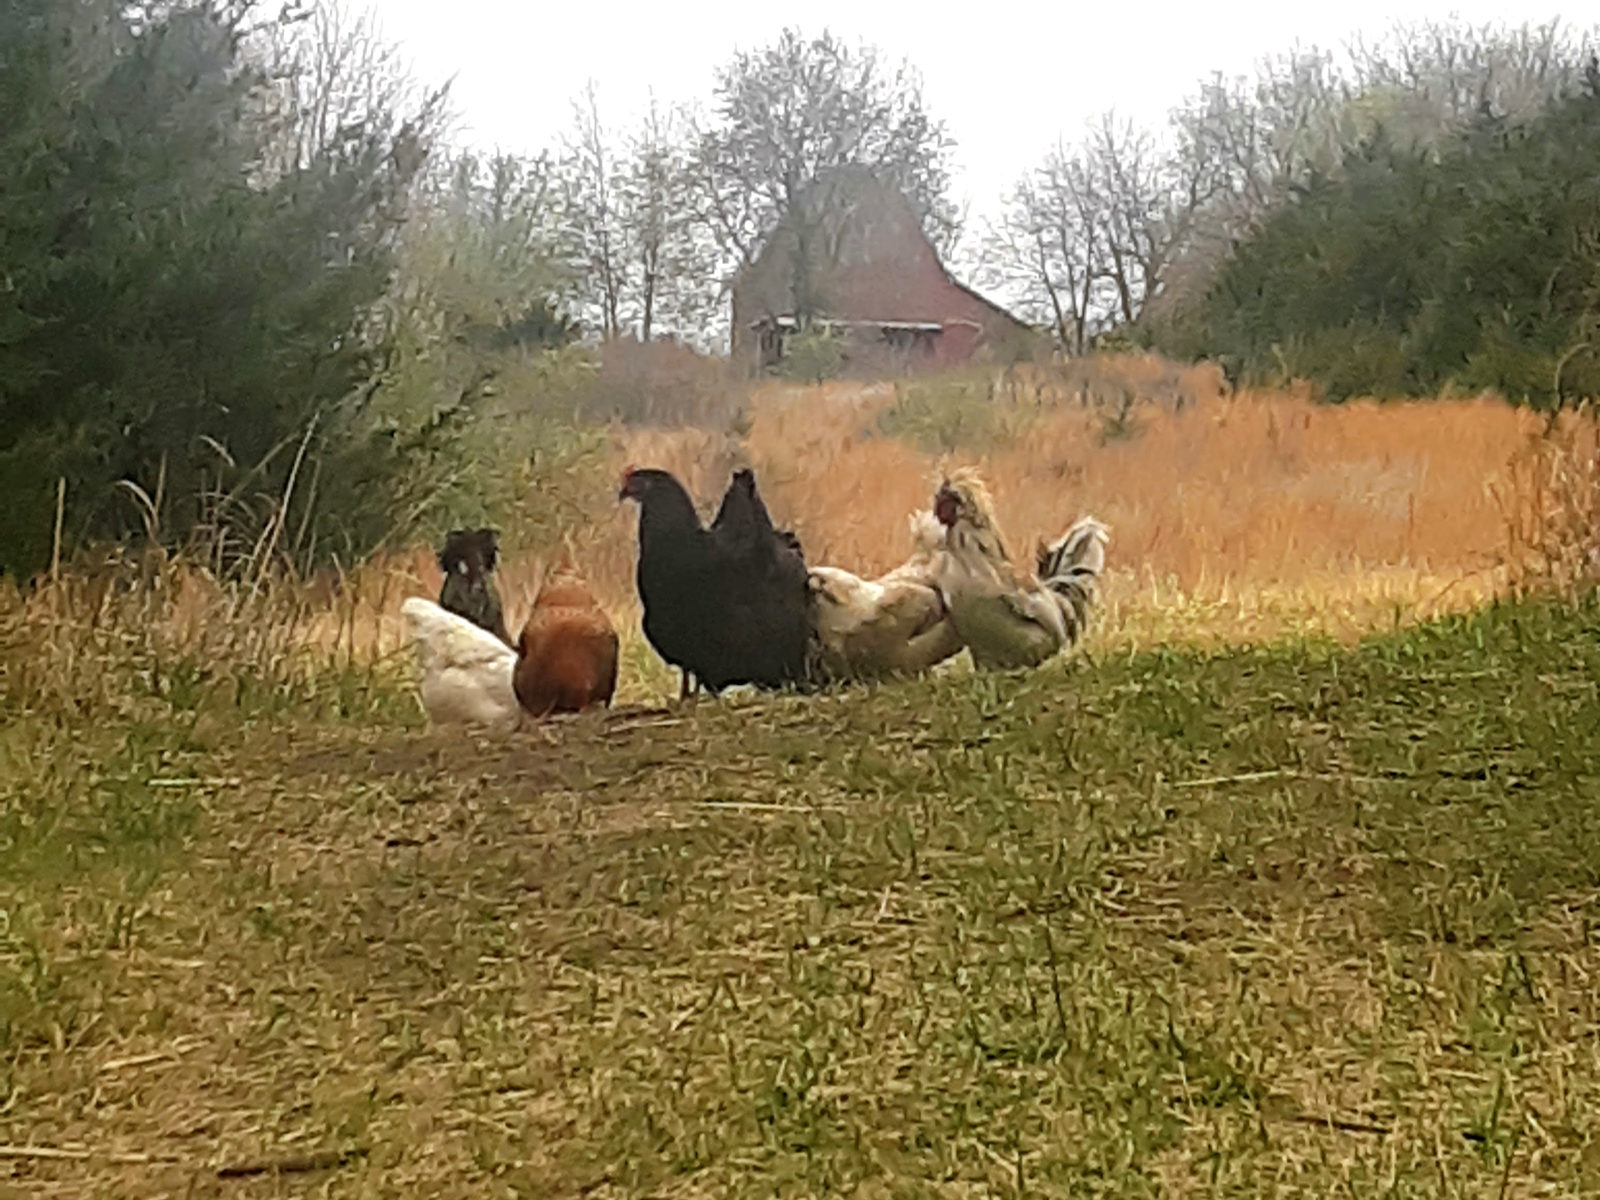 chickens free roaming with barn in background